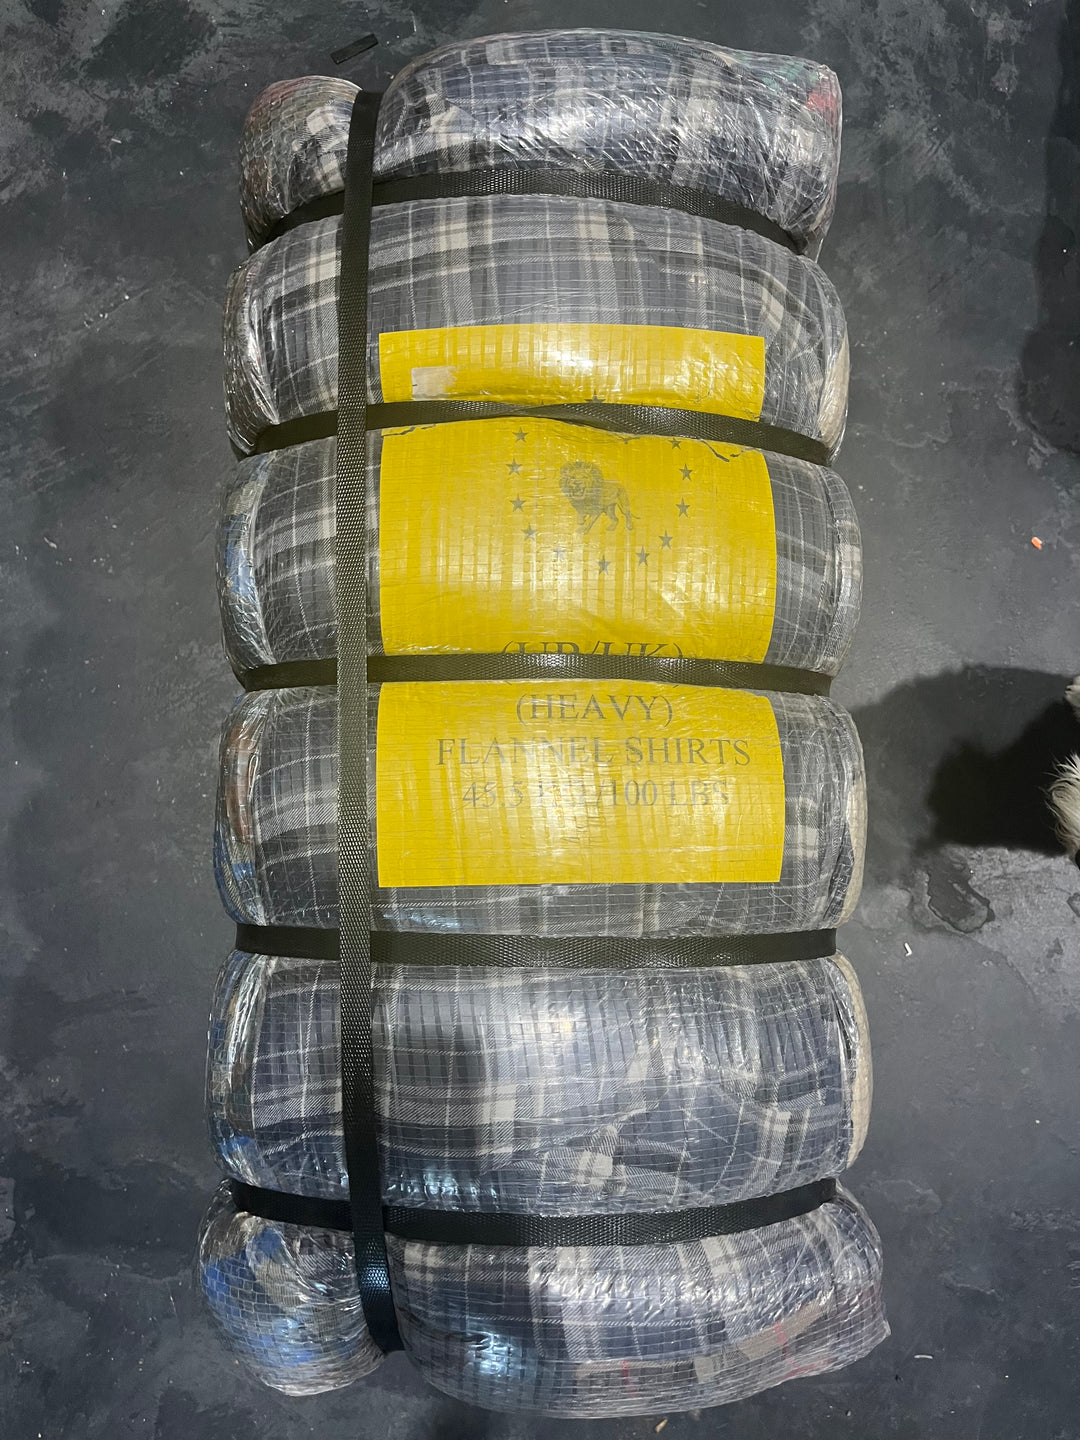 Unopened 45.5kg Bale of Heavy Flannel Shirts